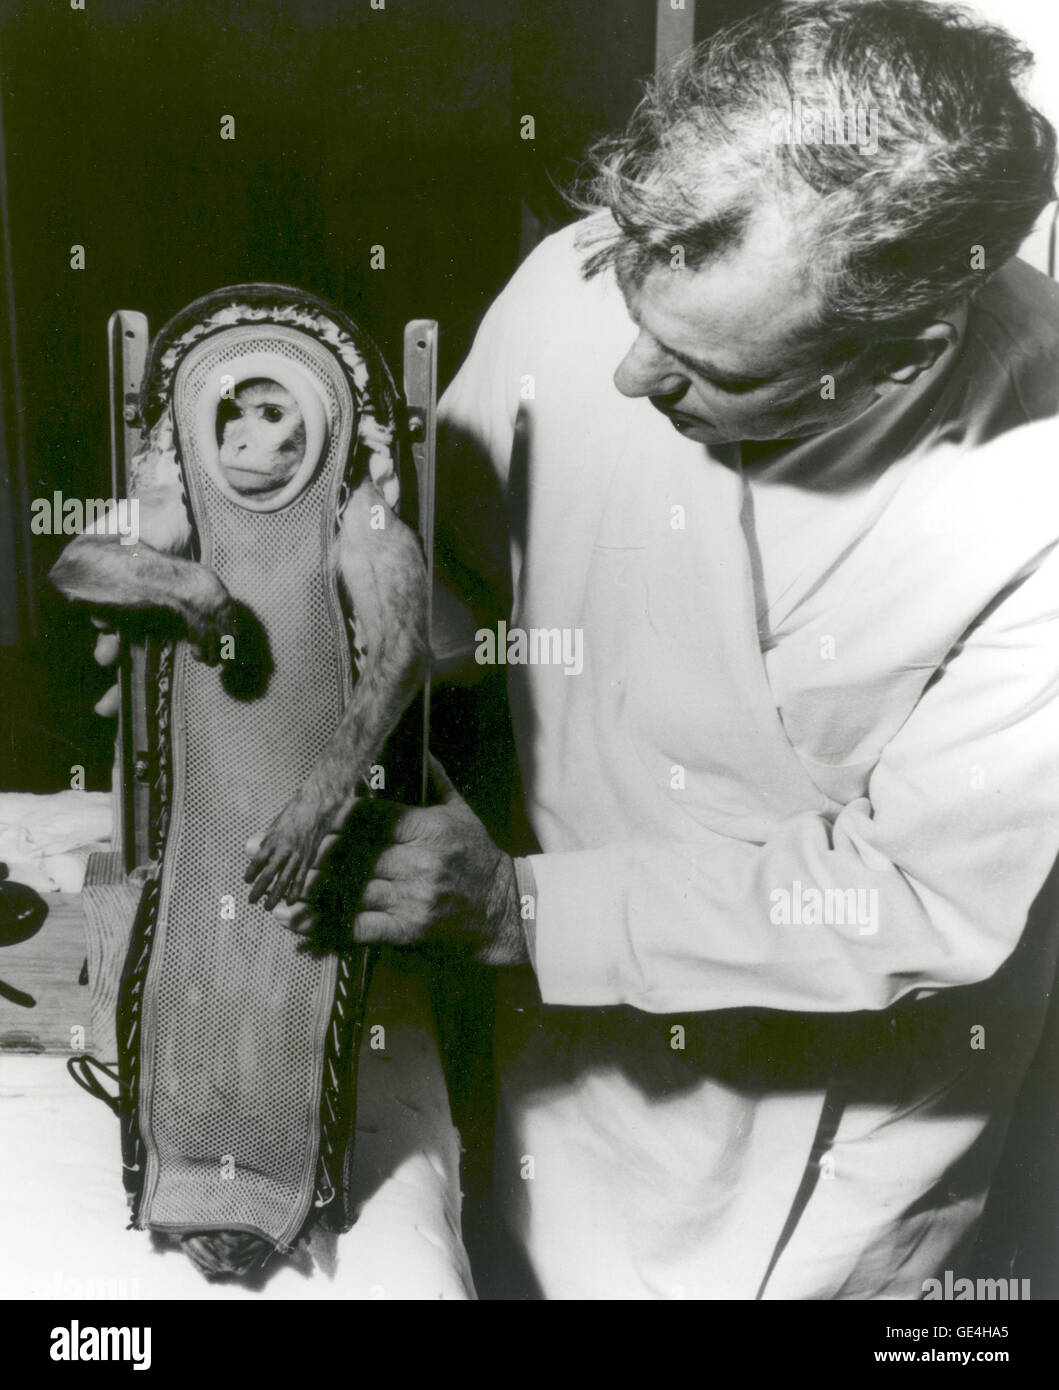 (December 4, 1959) Sam, the Rhesus monkey, after his ride in the Little Joe-2 (LJ-2) spacecraft. A U.S. Navy destroyer safely recovered Sam after he experienced three minutes of weightlessness during the flight. Animals were often used during test flights for Project Mercury to help determine the effects of spaceflight and weightlessness on humans. LJ-2 was one in a series of flights that led up to the human orbital flights of NASA's Project Mercury program. The Little Joe rocket booster was developed as a cheaper, smaller, and more functional alternative to the Redstone rockets. Little Joe co Stock Photo